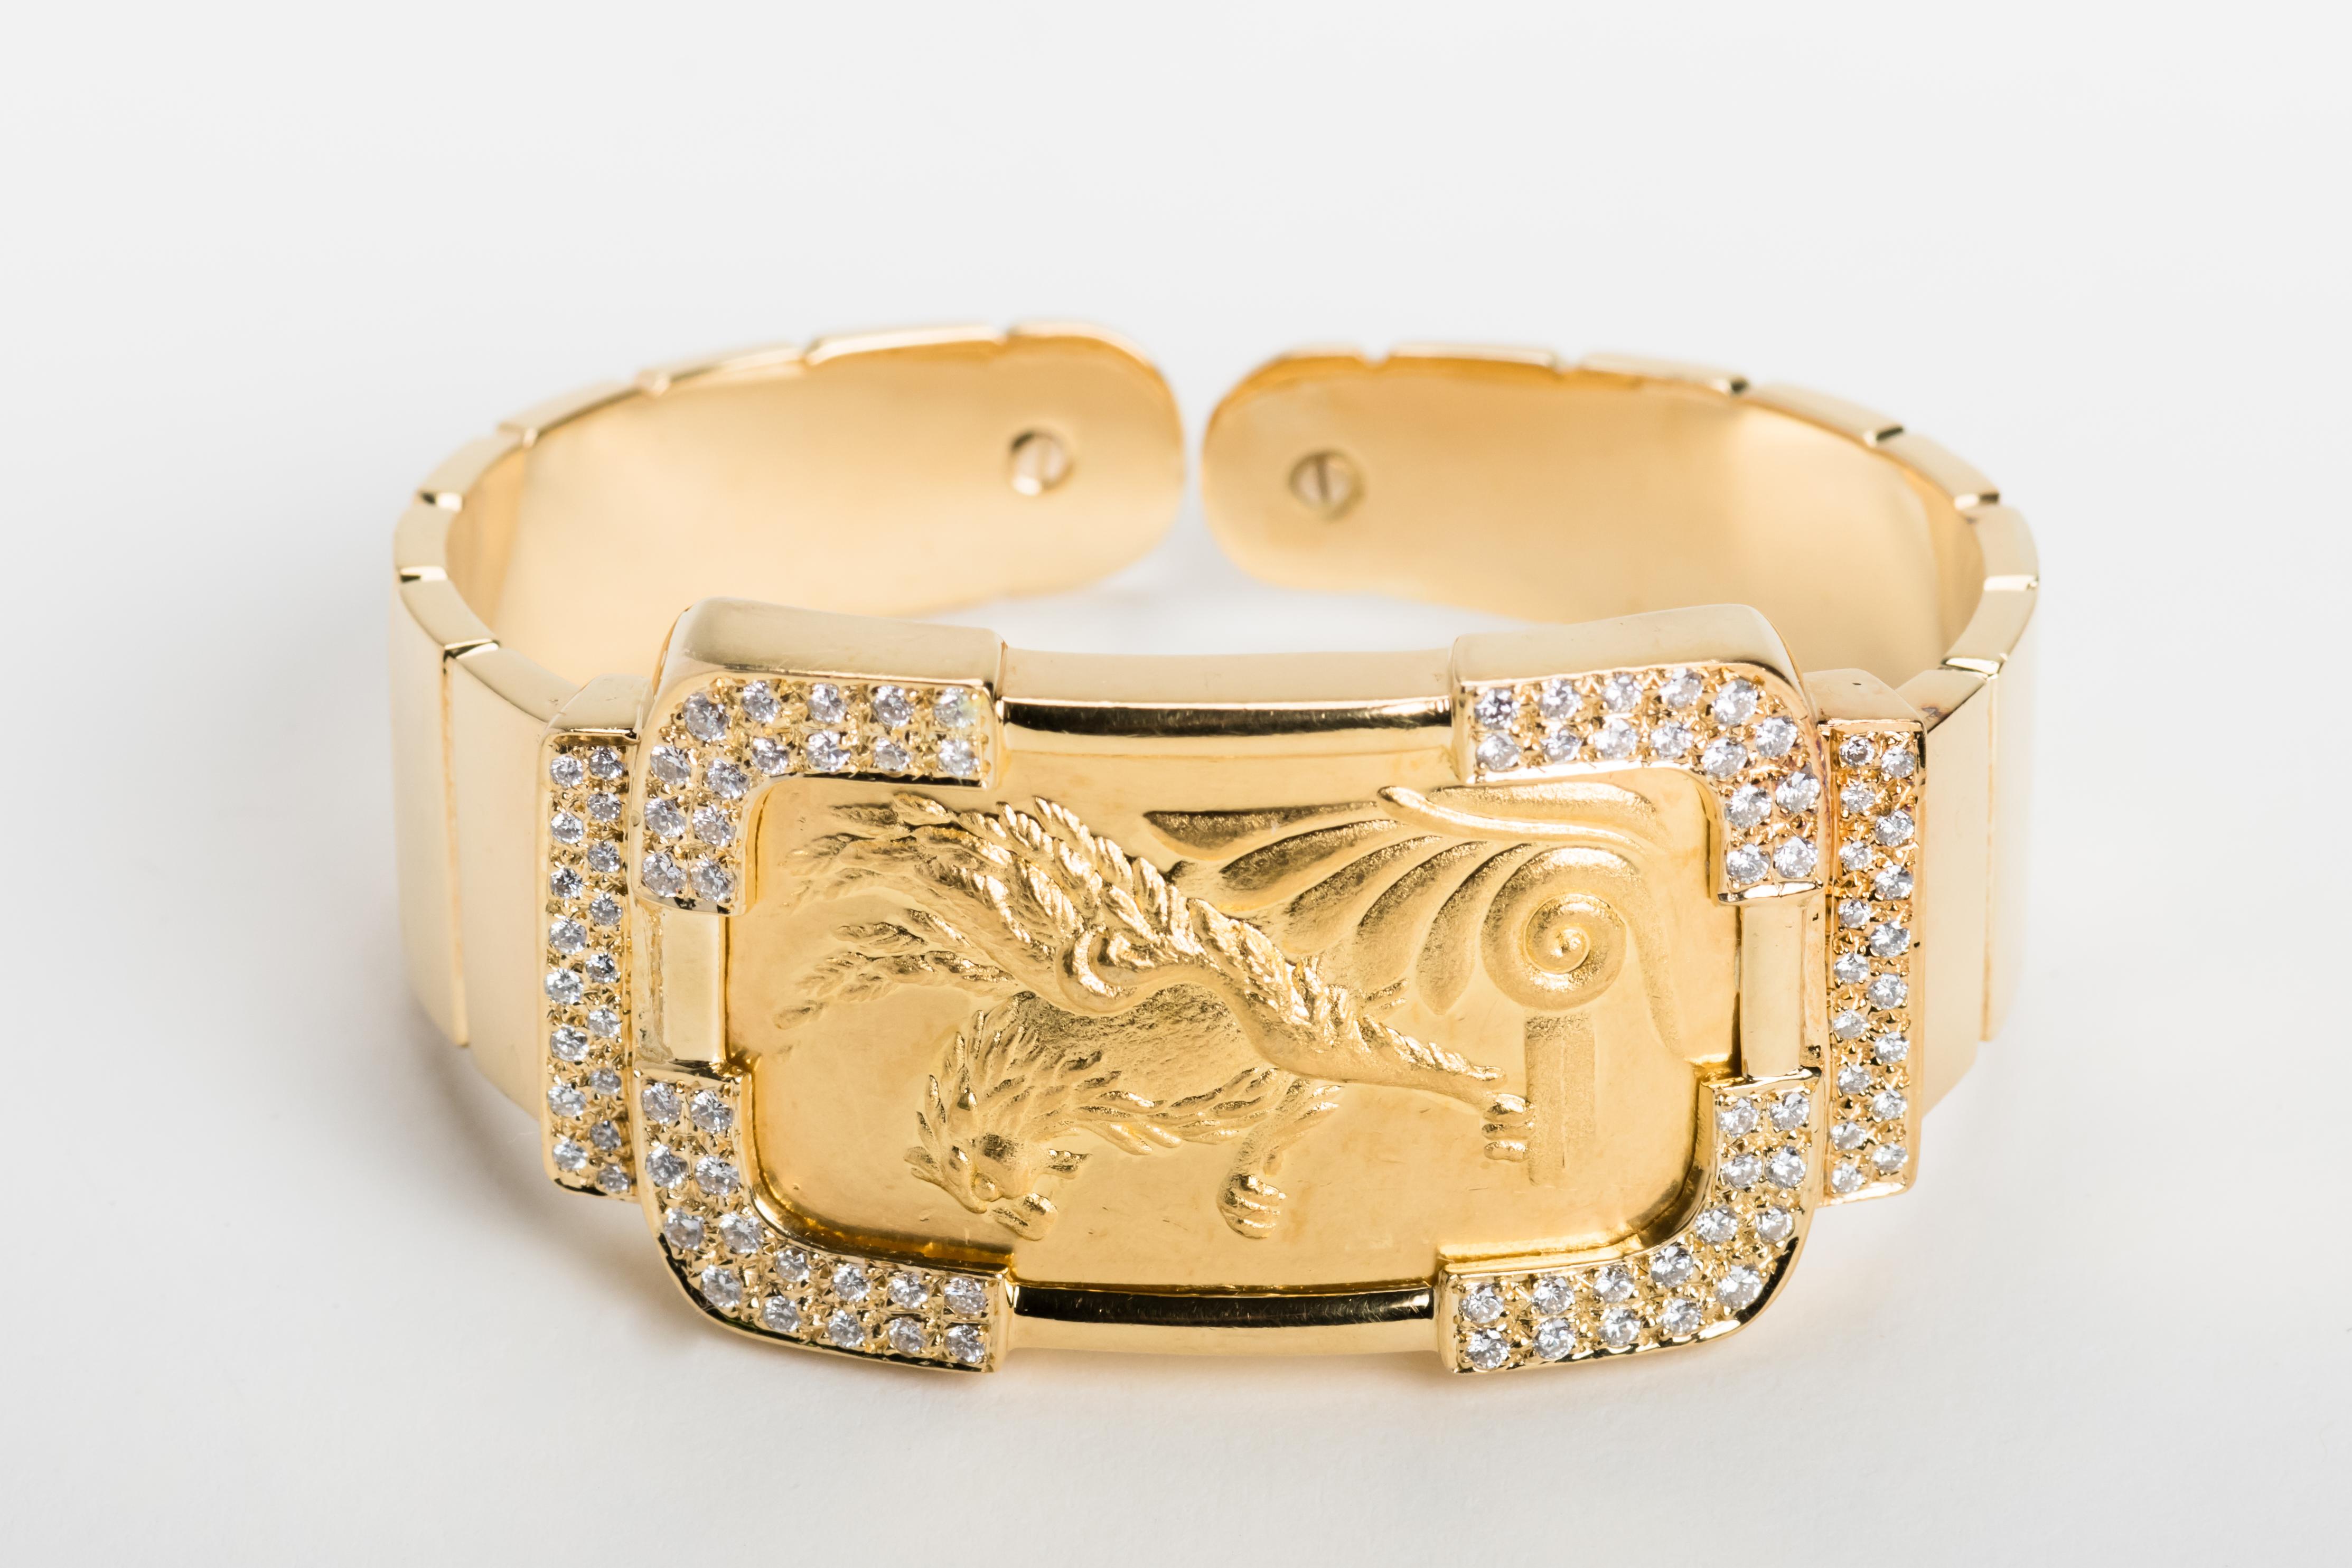 This beautifully custom made yellow gold flexible cuff bracelet has a 24 karat gold winged lion in the center surrounded by diamonds and a 18 karat gold band. It is signed by Etros and Takis. The bracelet is flexible and can fit any size